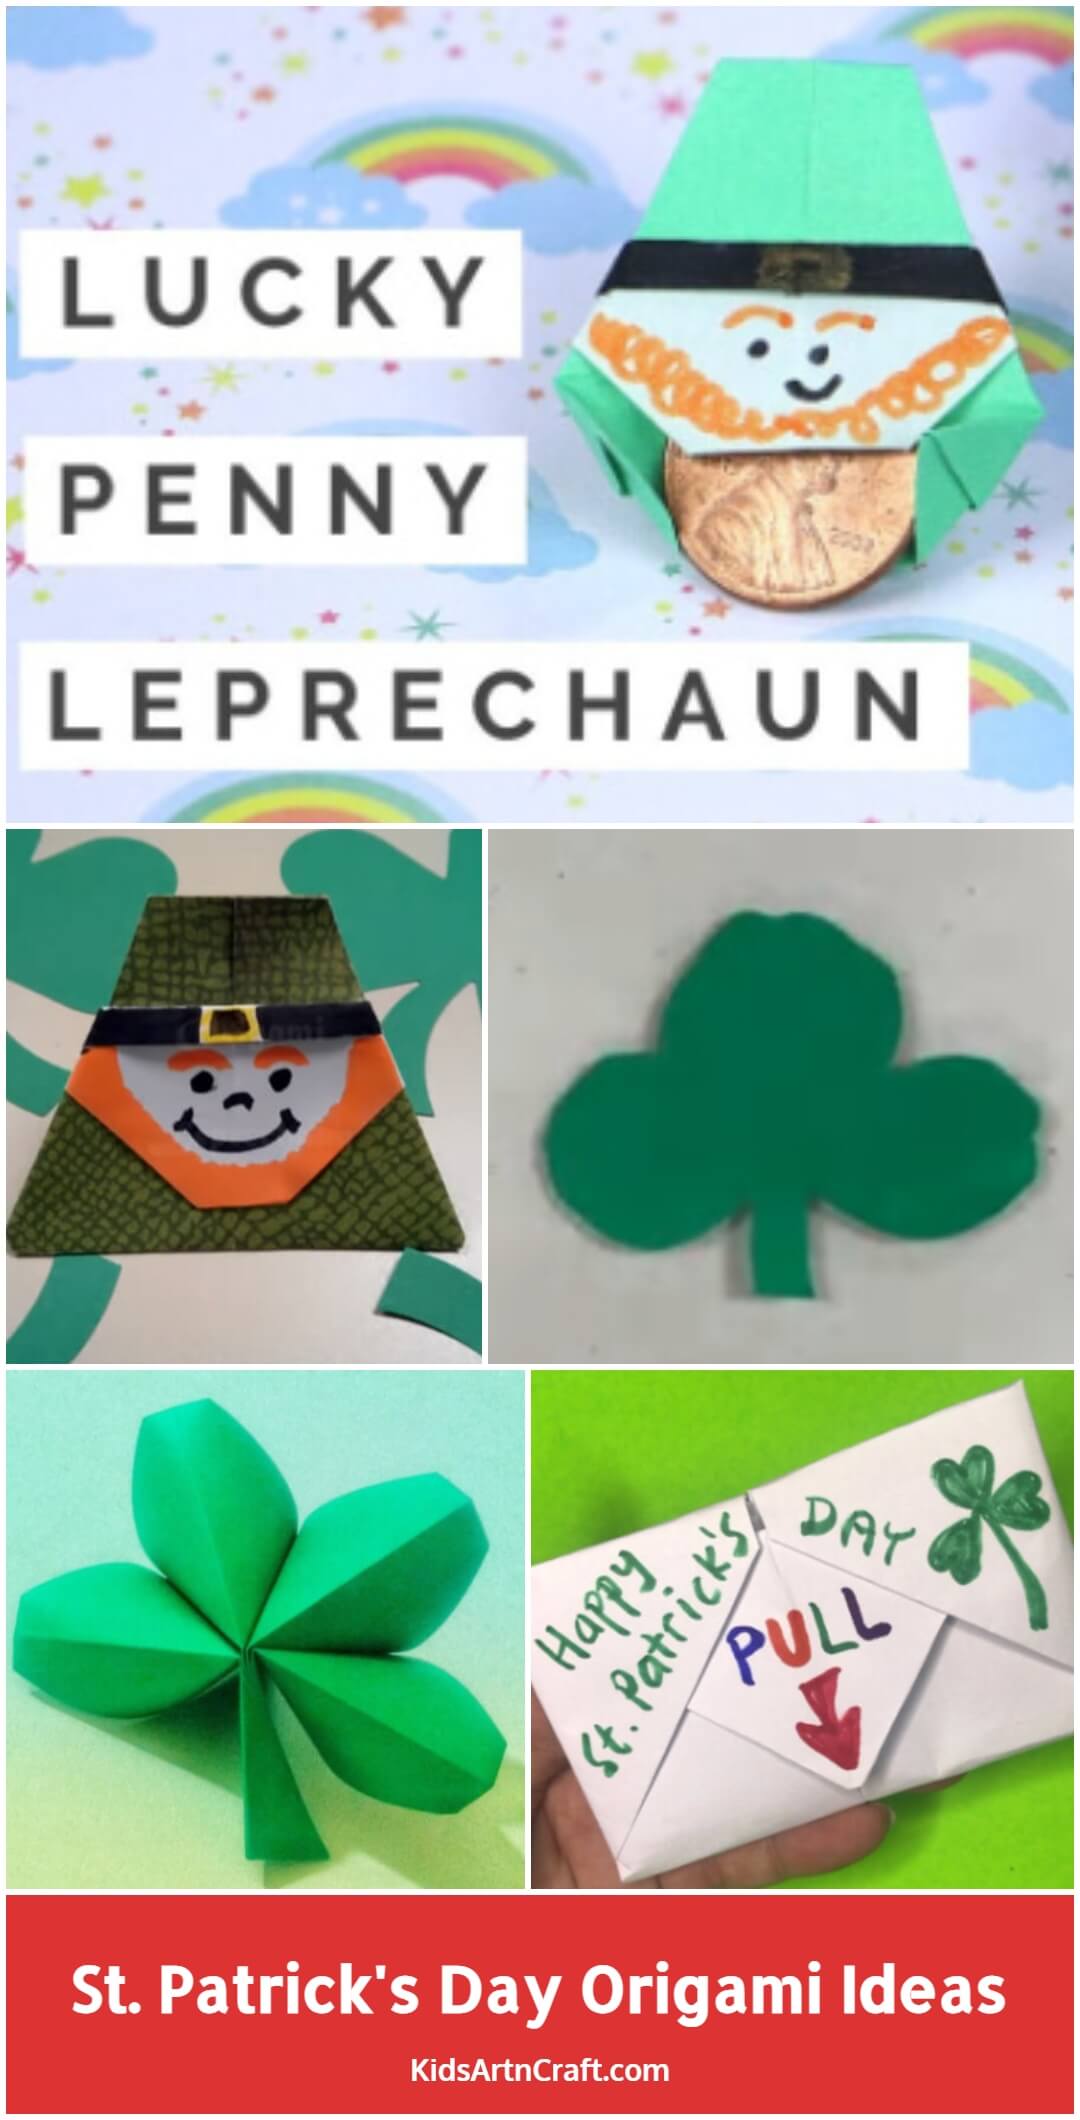 St. Patrick's Day Origami Ideas That Kids Can Make